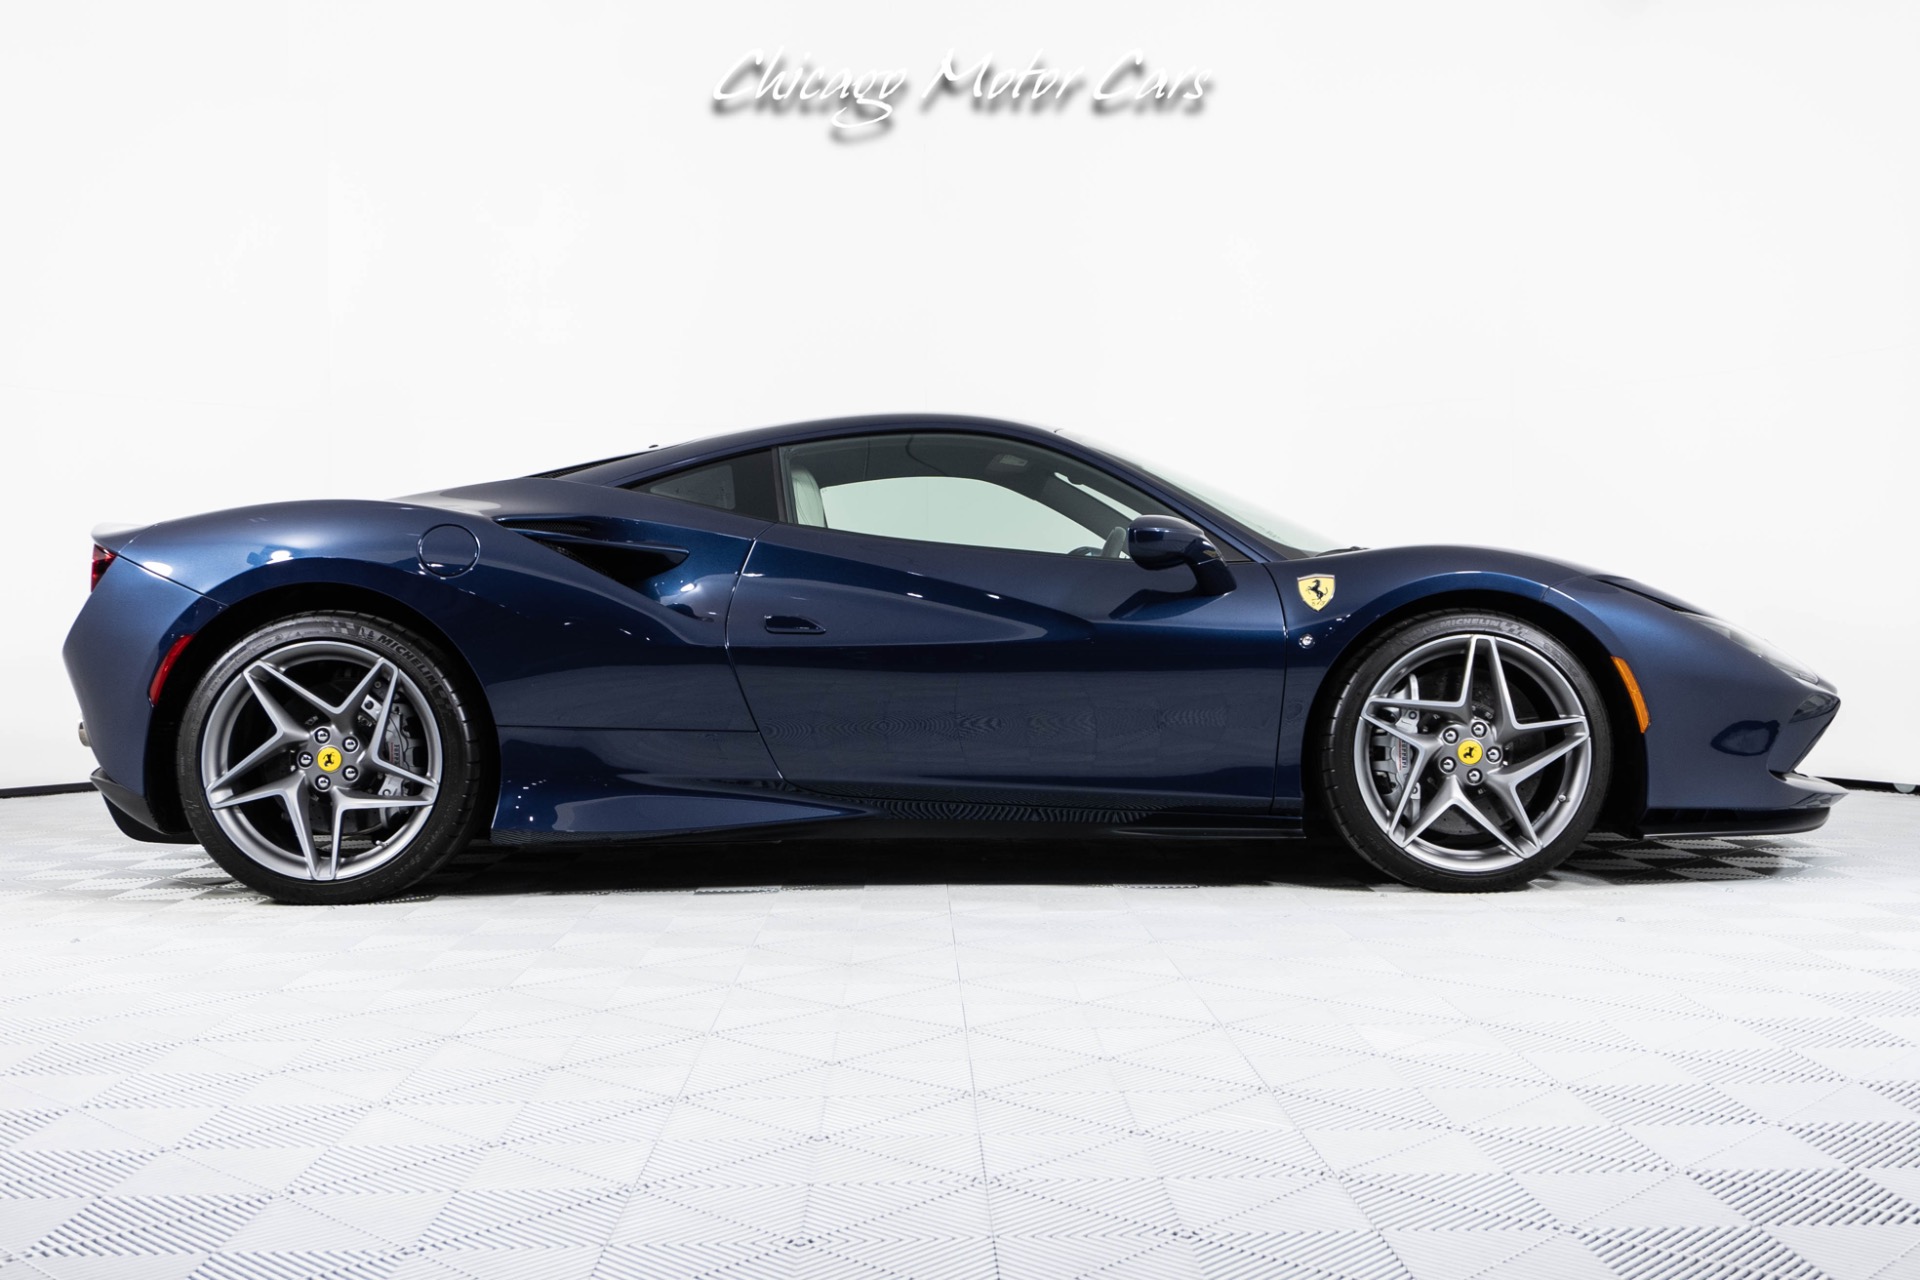 Used-2021-Ferrari-F8-Tributo-Hot-Color-Combo-Suspension-Lifter-Full-Electric-Seats-Front-PPF-6K-Miles